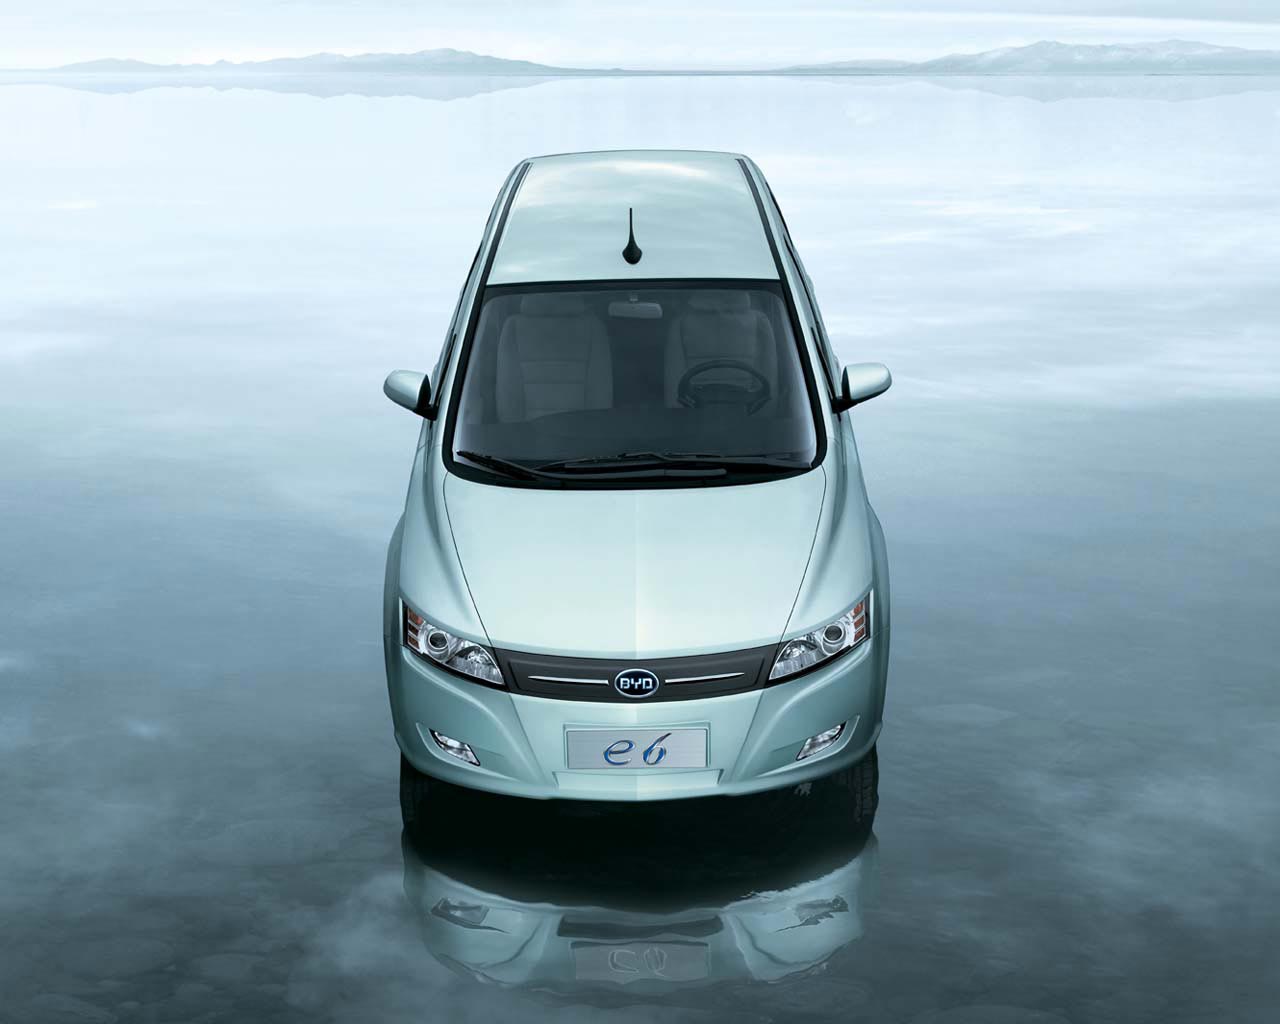 byds e6 electric car heading for 2011 us launch